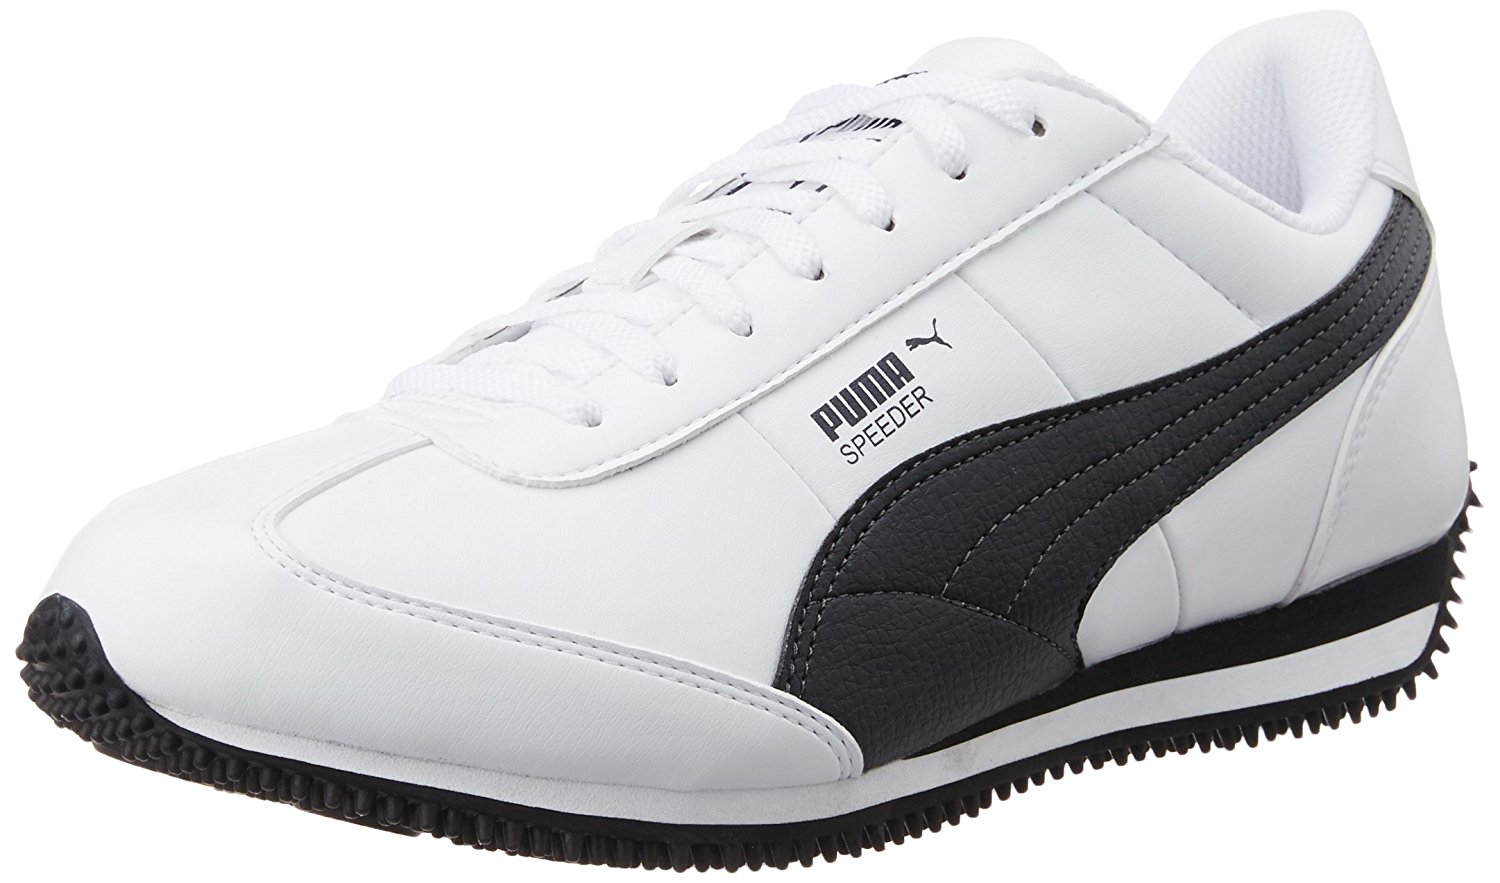 Buy Puma Men Black White Lace-up Casual Shoes Online @ ₹2500 from ShopClues